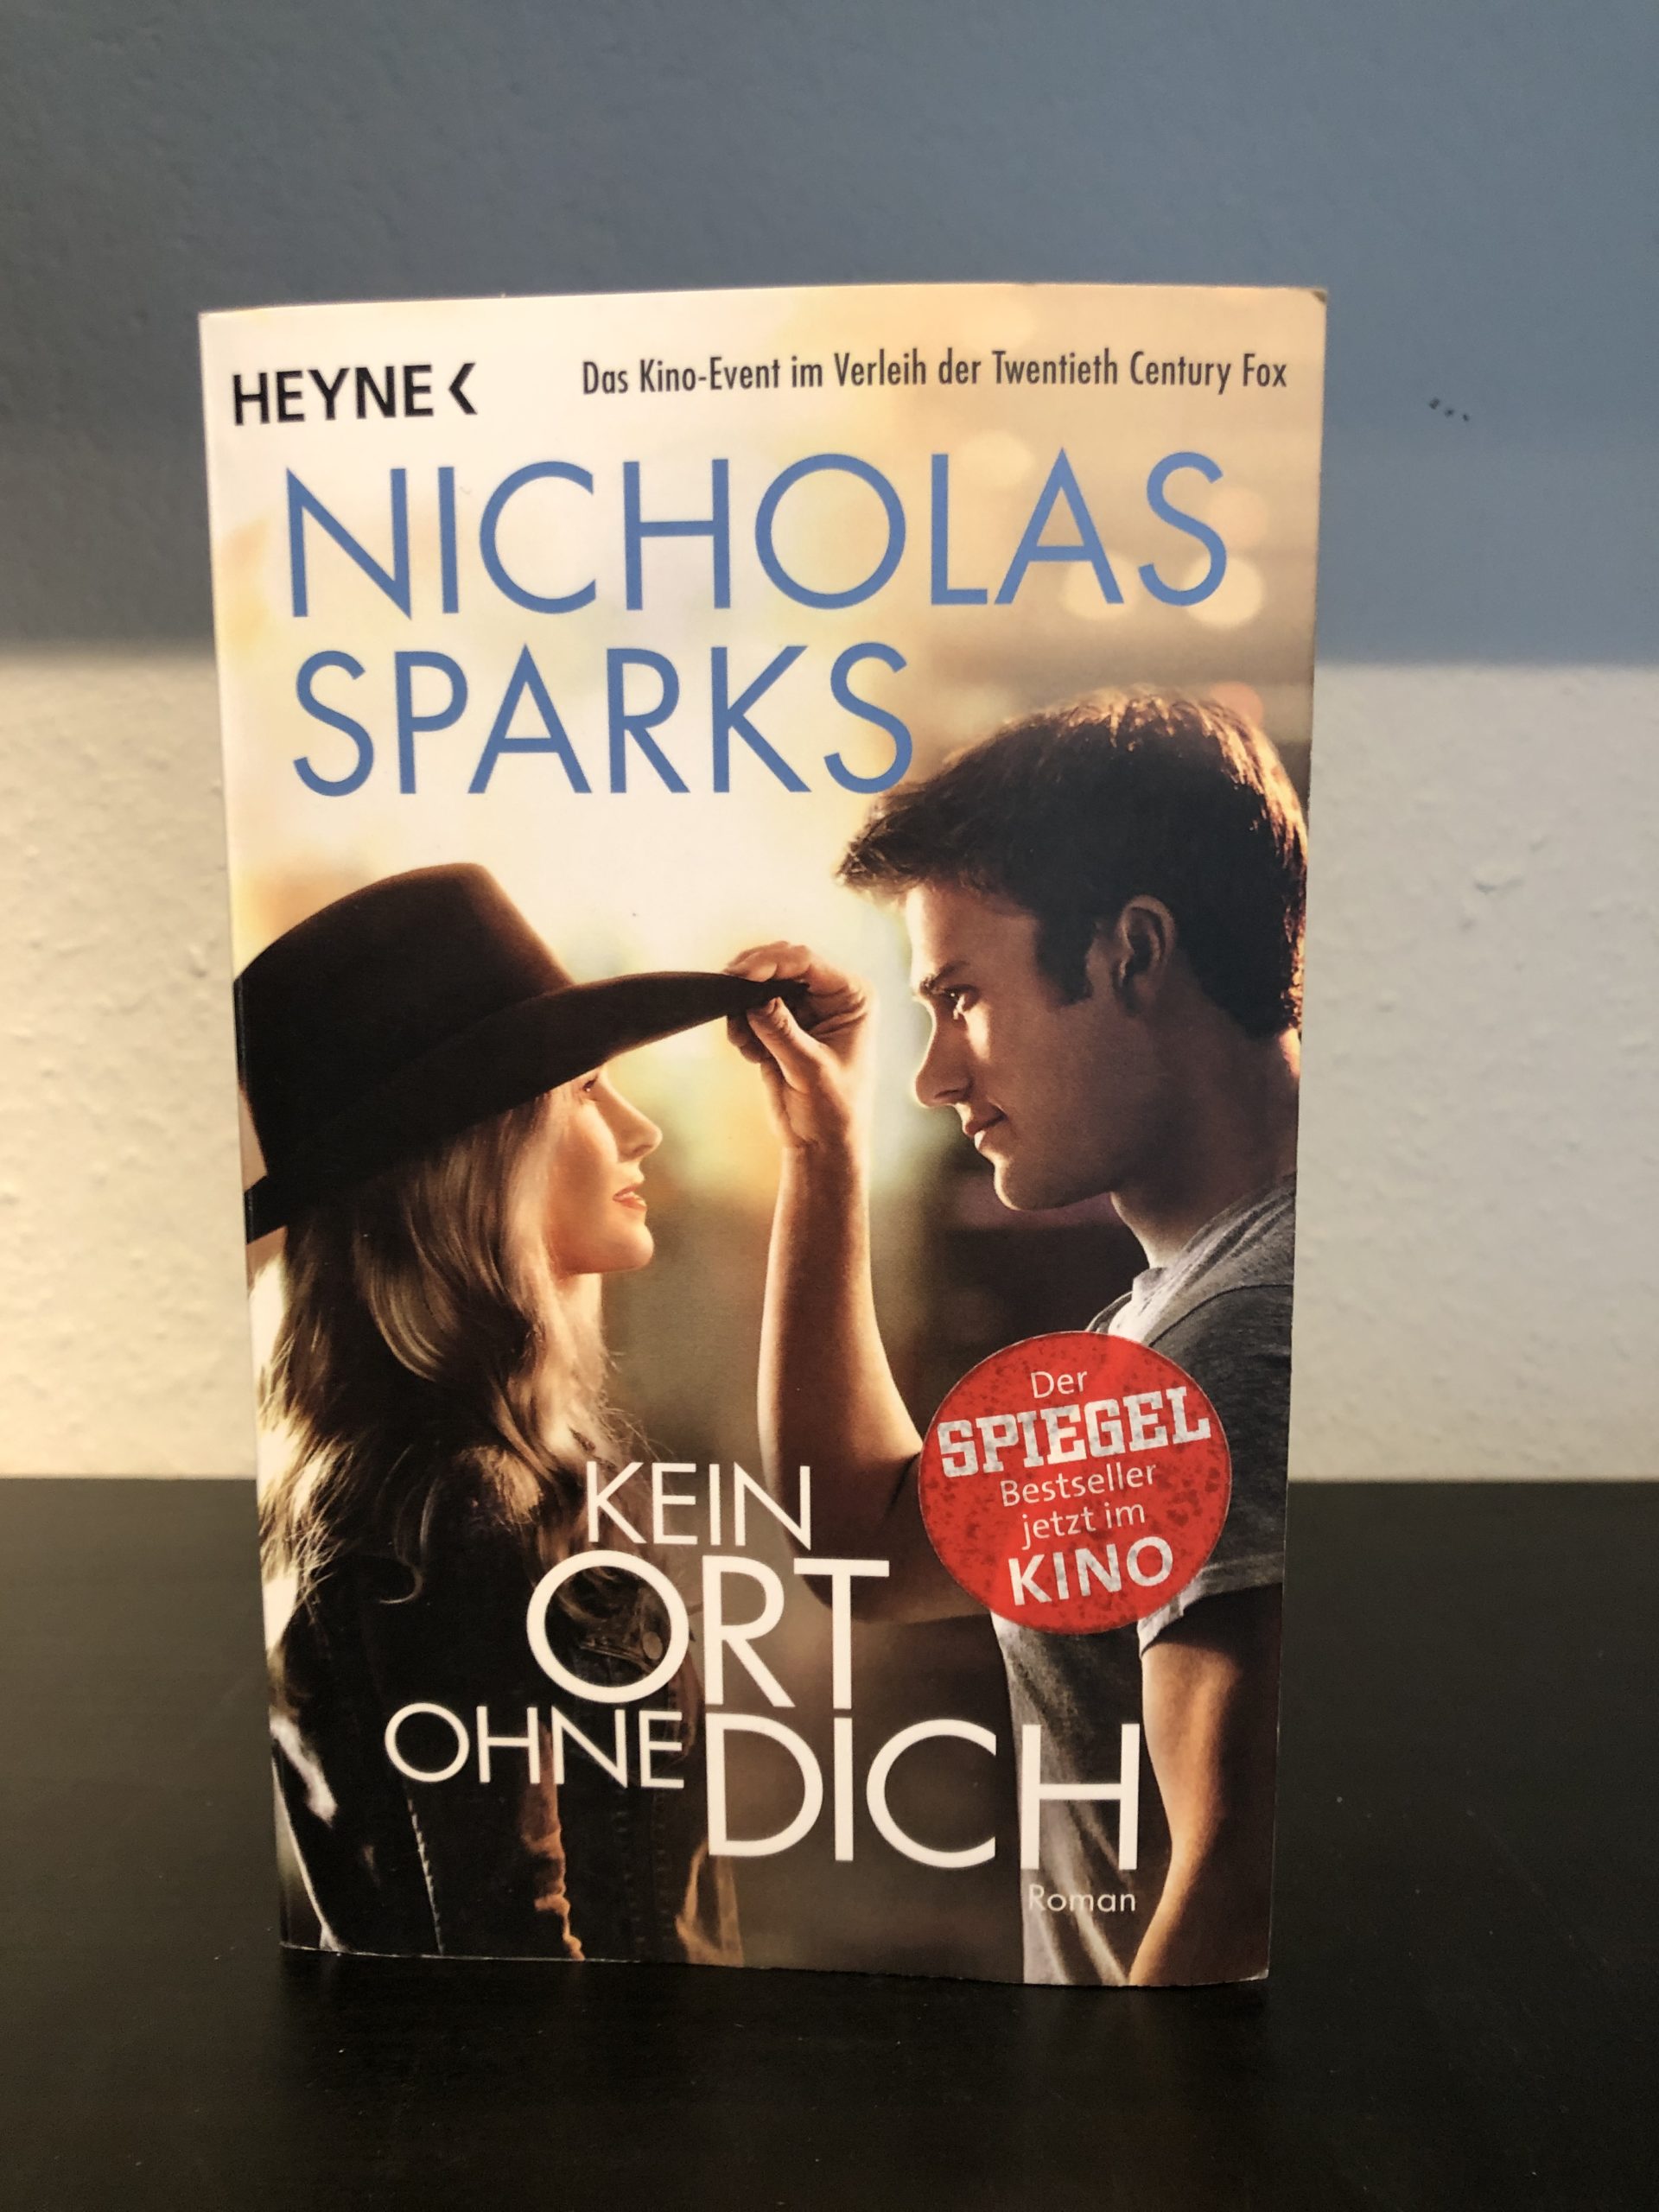 Kein Ort ohne dich - Nicholas Sparks main image